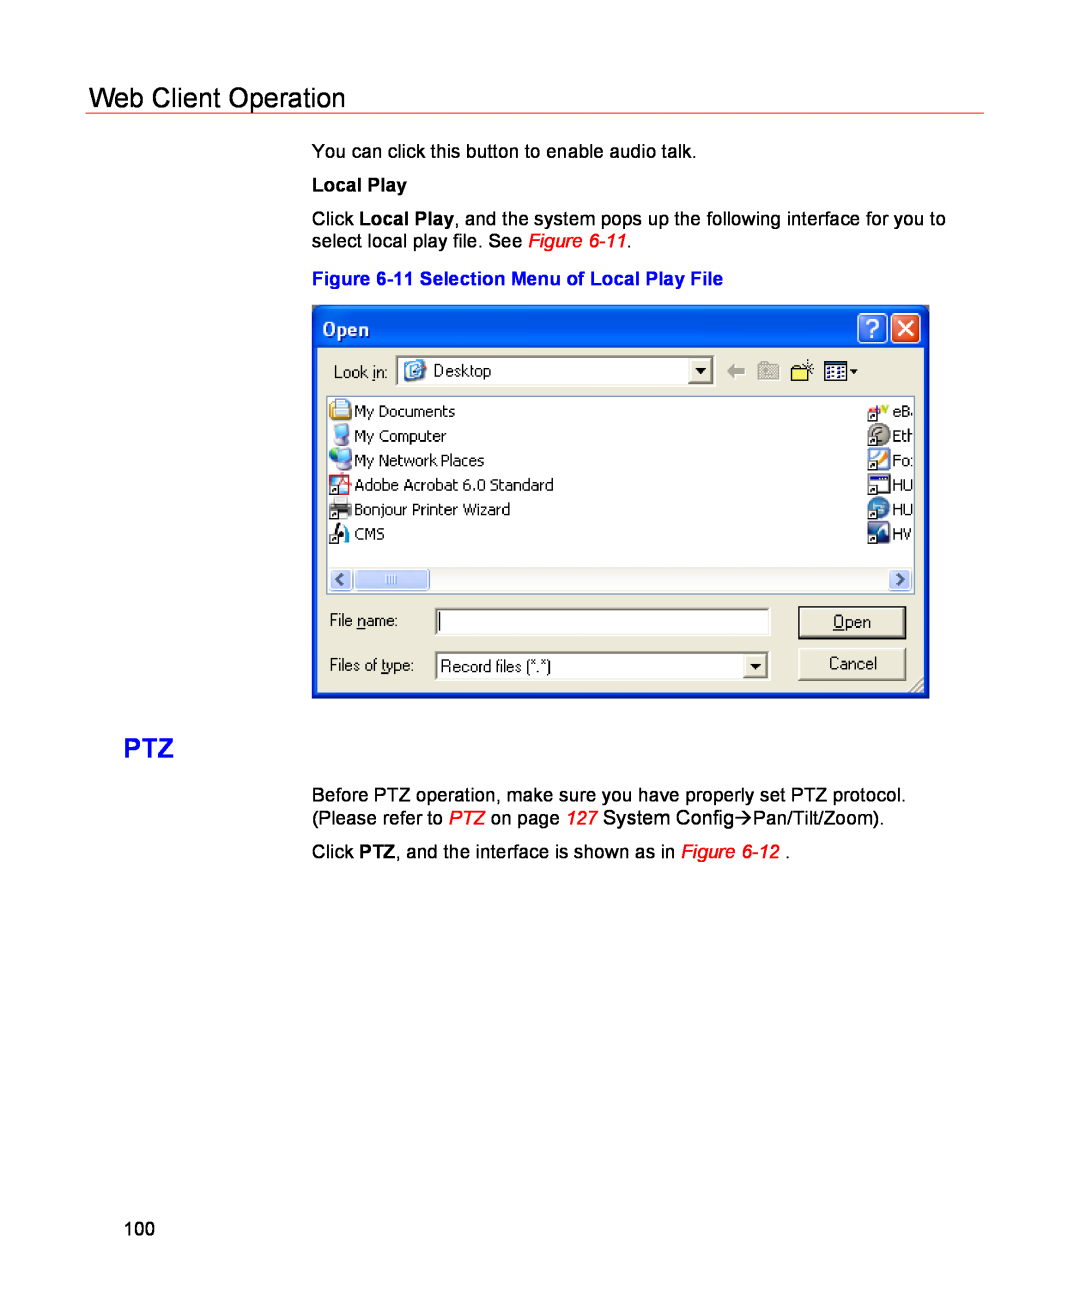 Honeywell HSVR-04, HSVR-16 user manual Web Client Operation, 11 Selection Menu of Local Play File 